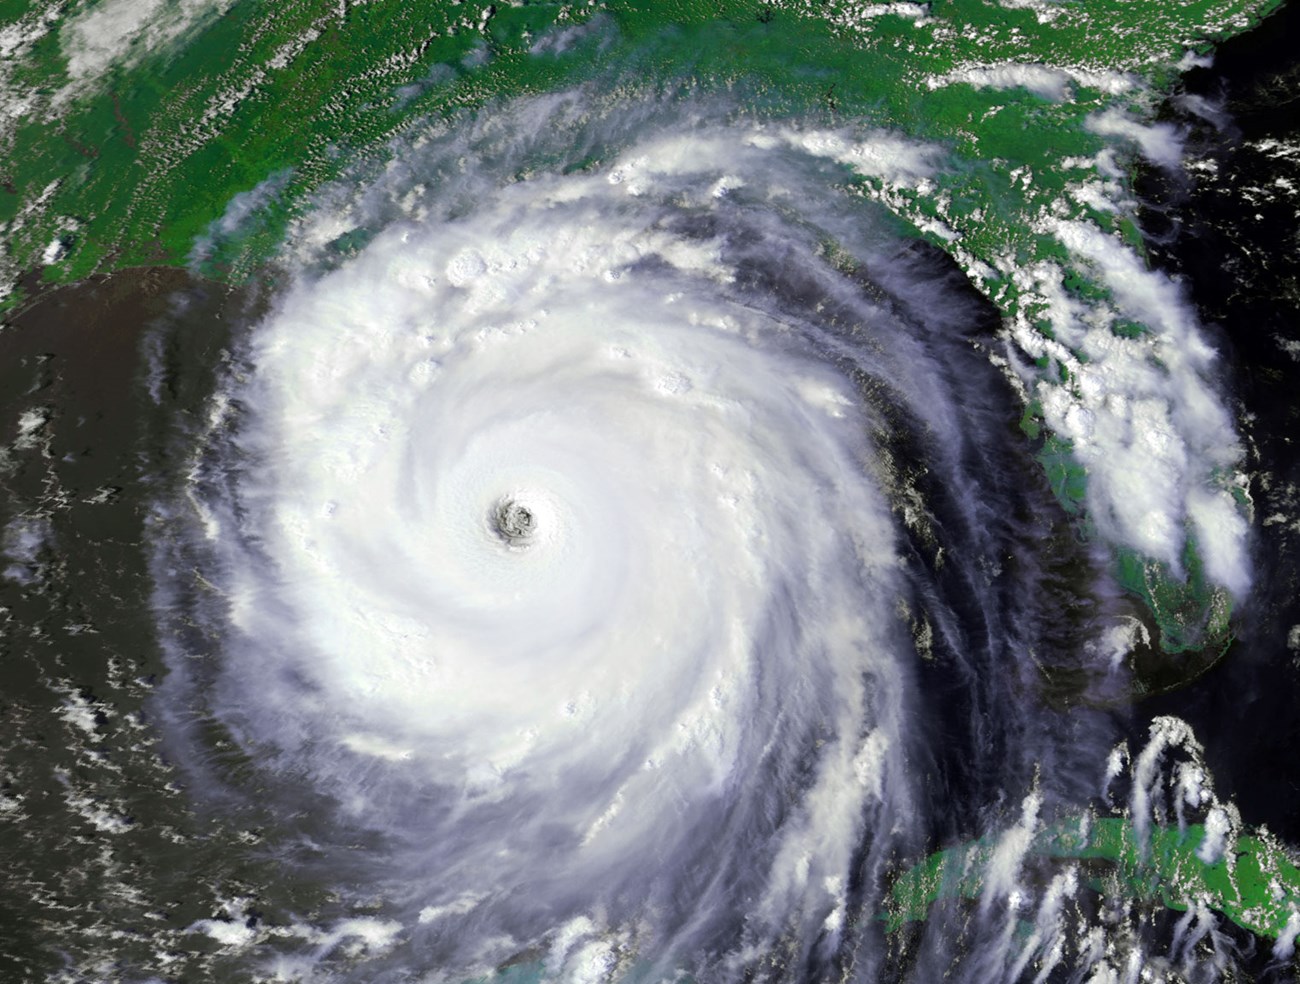 view of hurricane from above